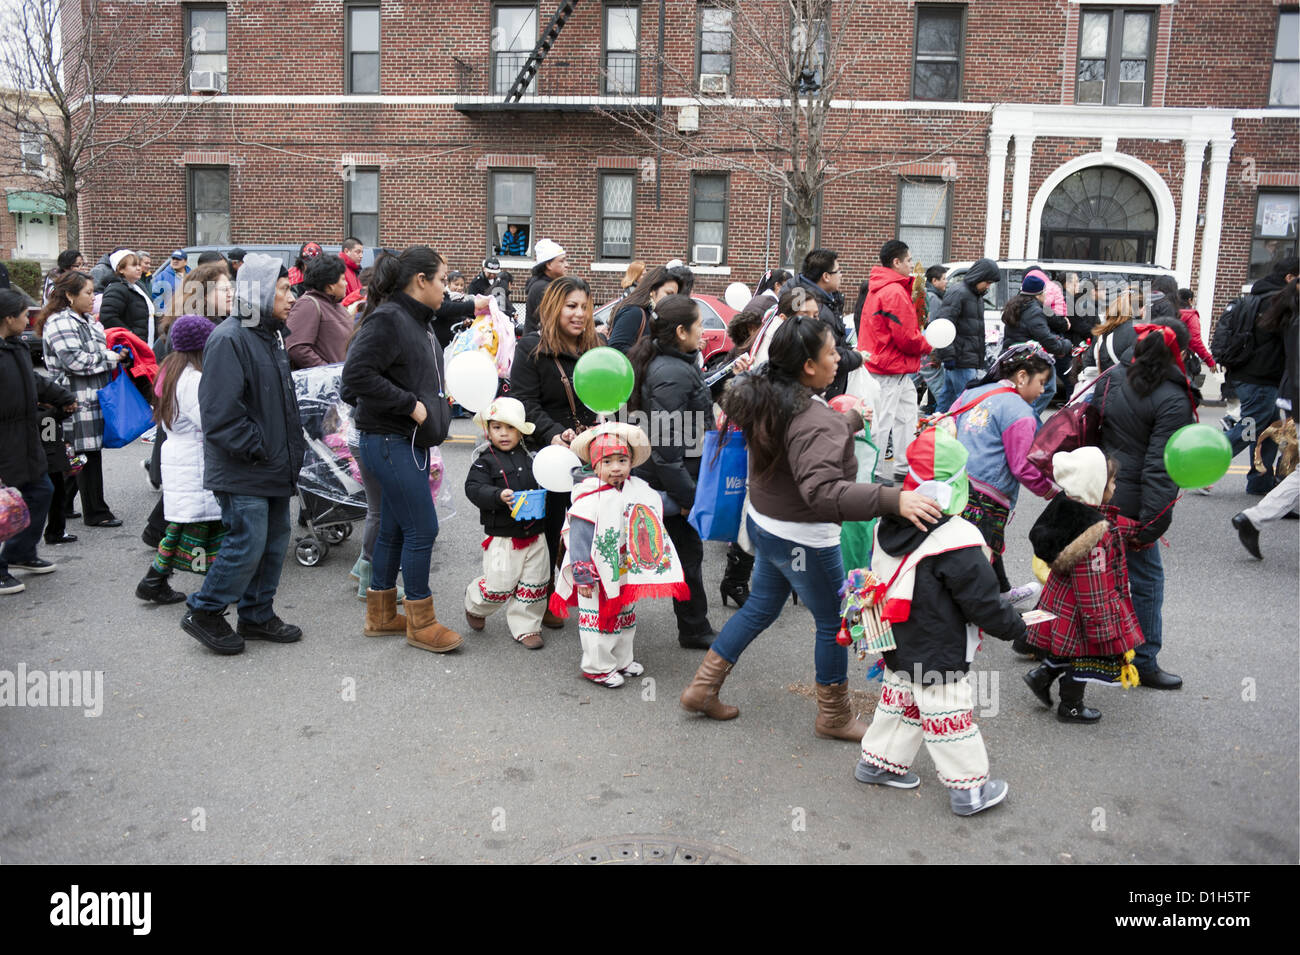 Festival of the Virgin of Guadalupe, the patron Saint of Mexico. Procession in the Borough Park section of Brooklyn, 2012. Stock Photo